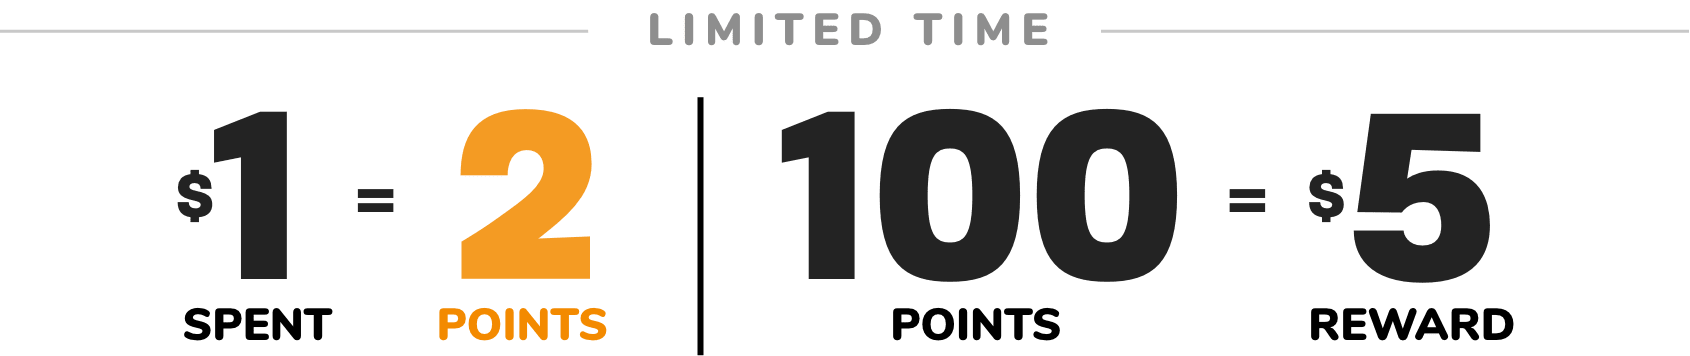 DOUBLE POINTS | LIMITED TIME